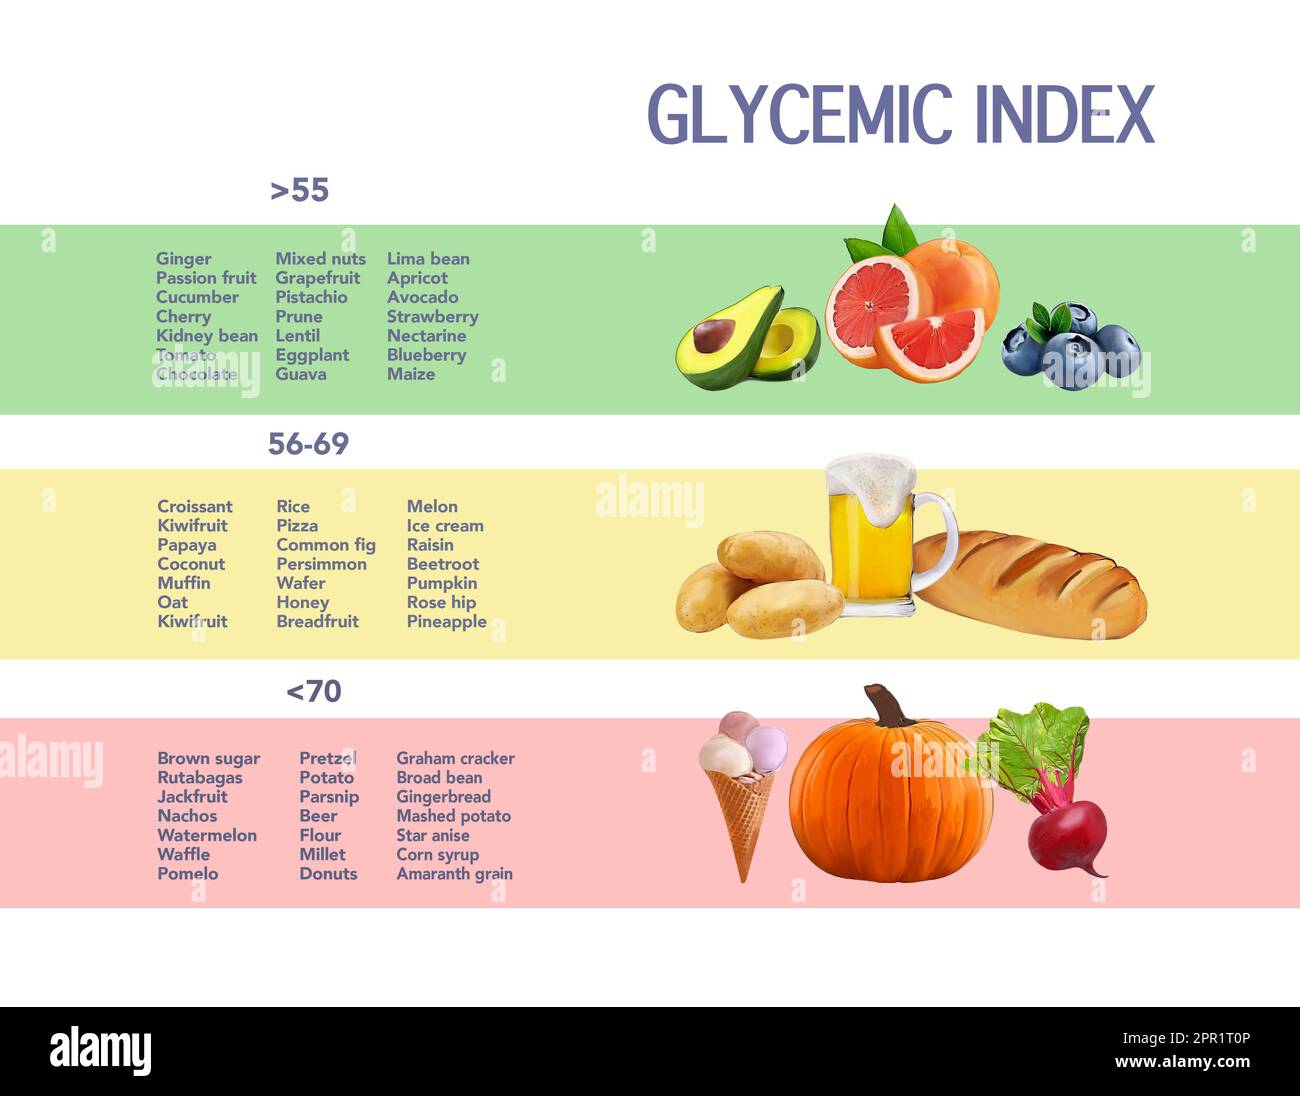 Glycemic index chart for common foods. Illustration Stock Photo